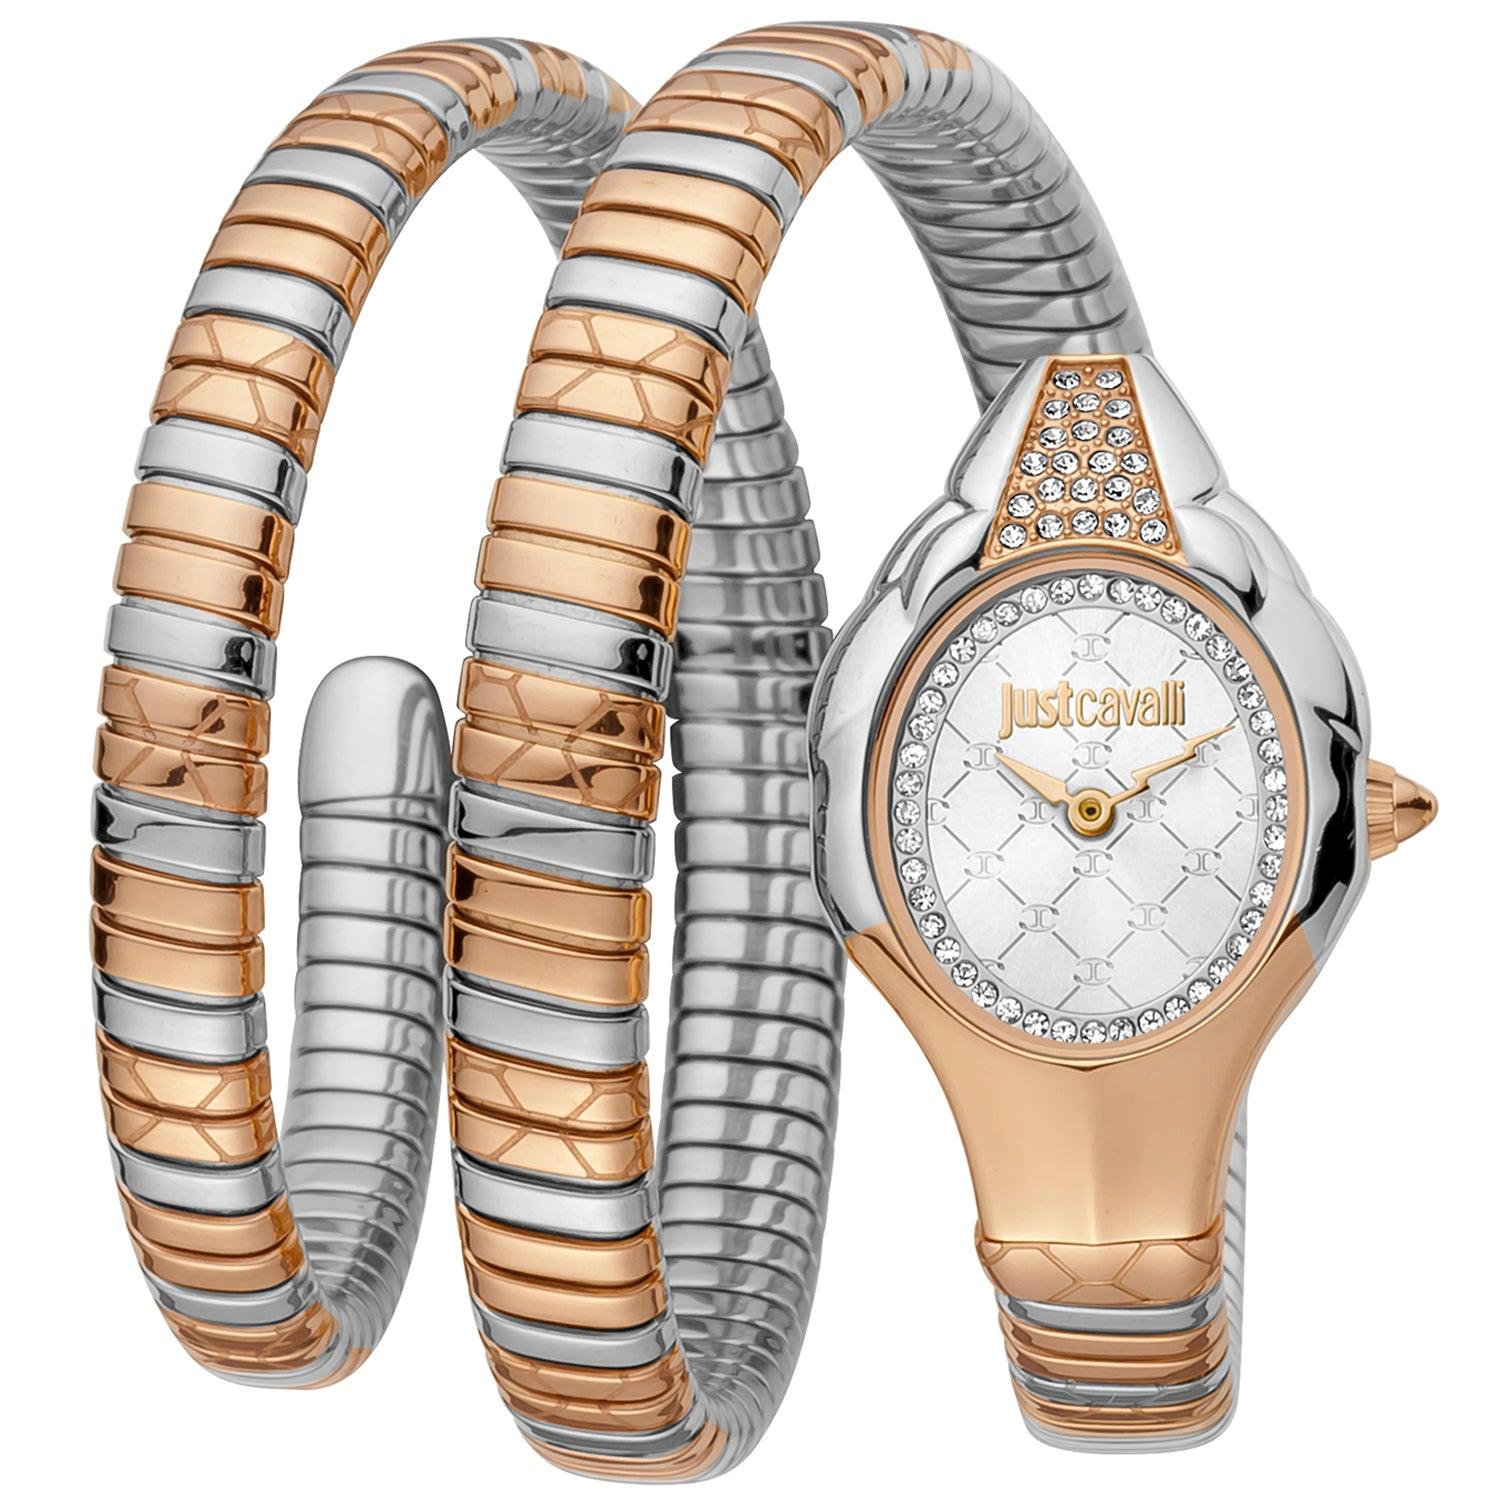 Just Cavalli Watches For Woman | Lyst